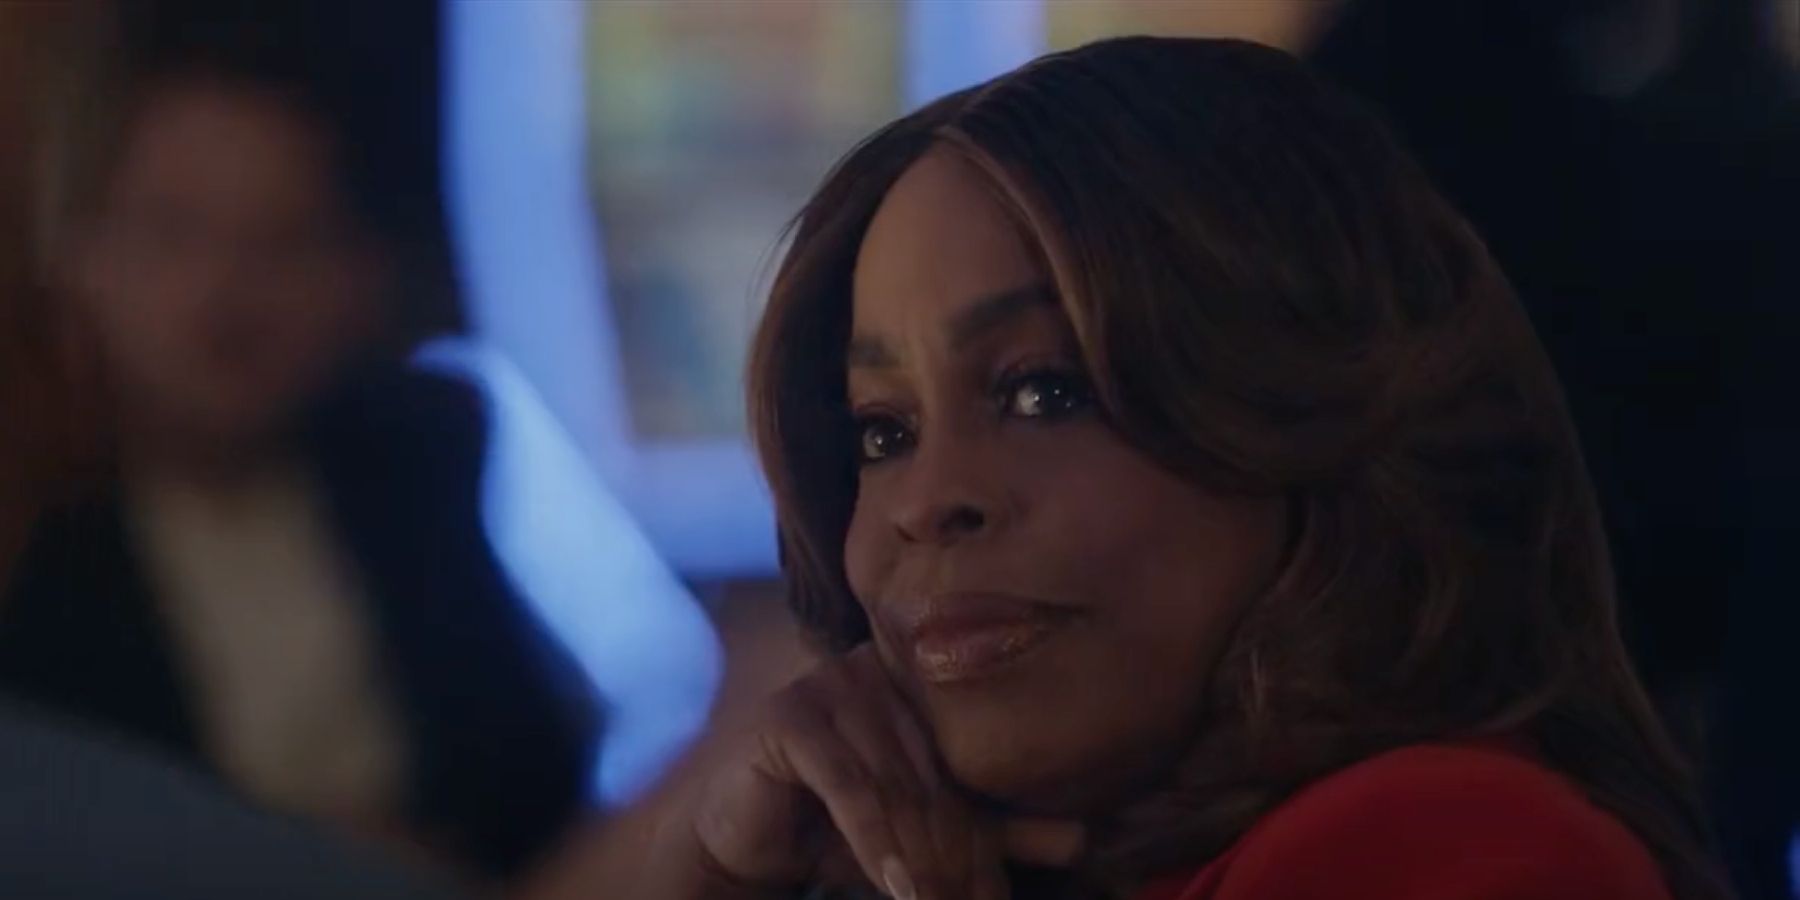 Niecy Nash as Simone Clark in The Rookie Feds season 1 episode 22